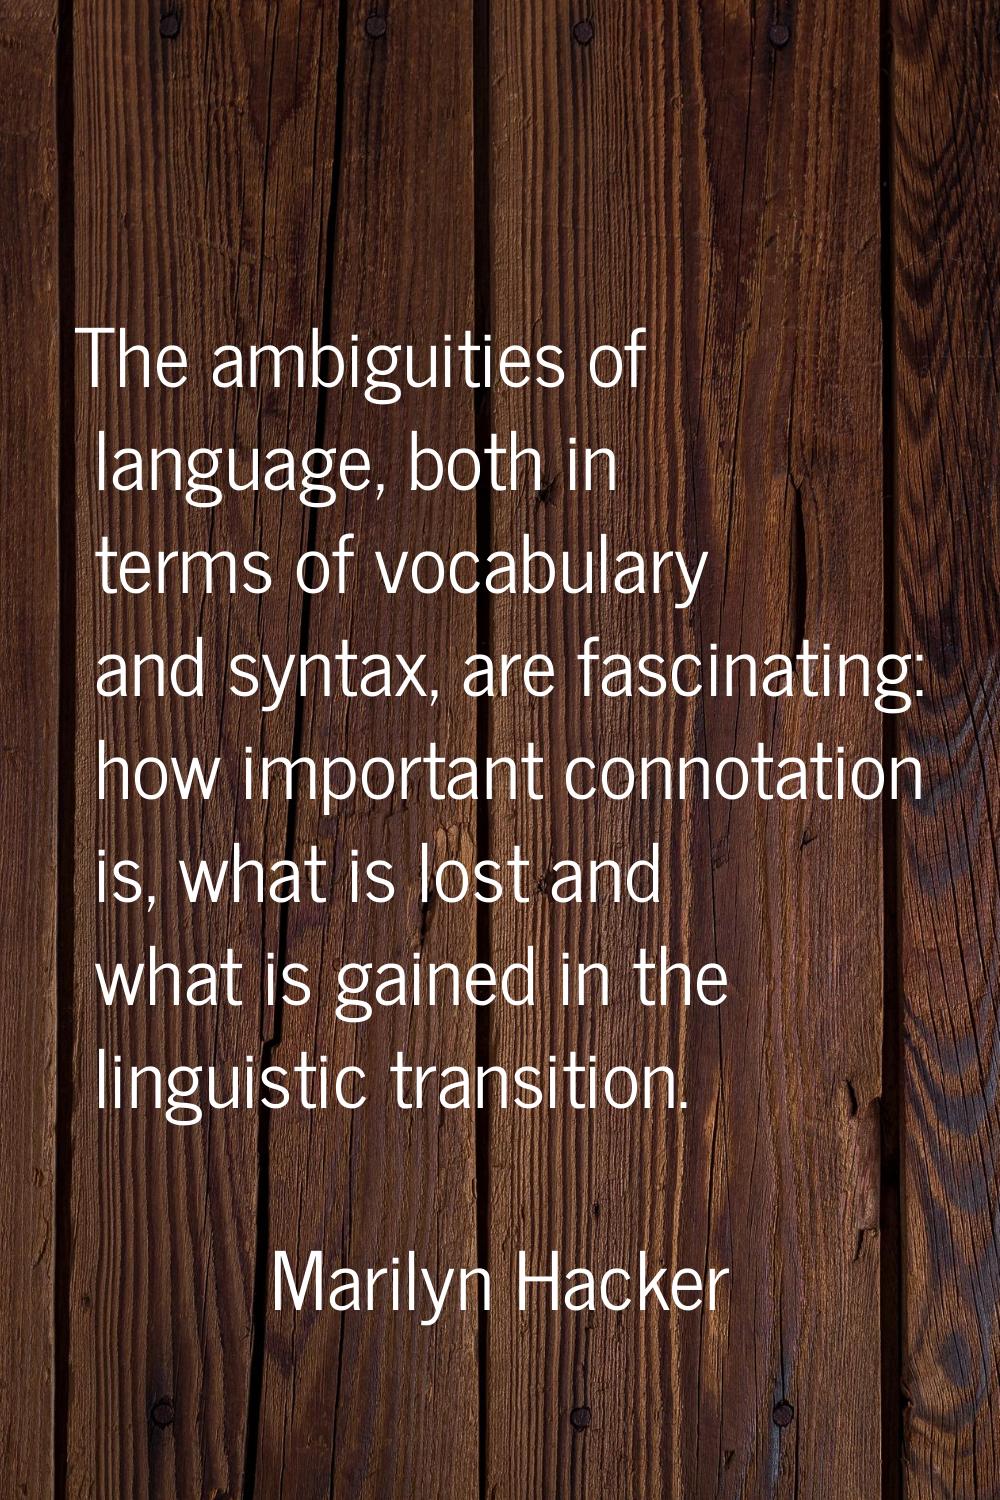 The ambiguities of language, both in terms of vocabulary and syntax, are fascinating: how important